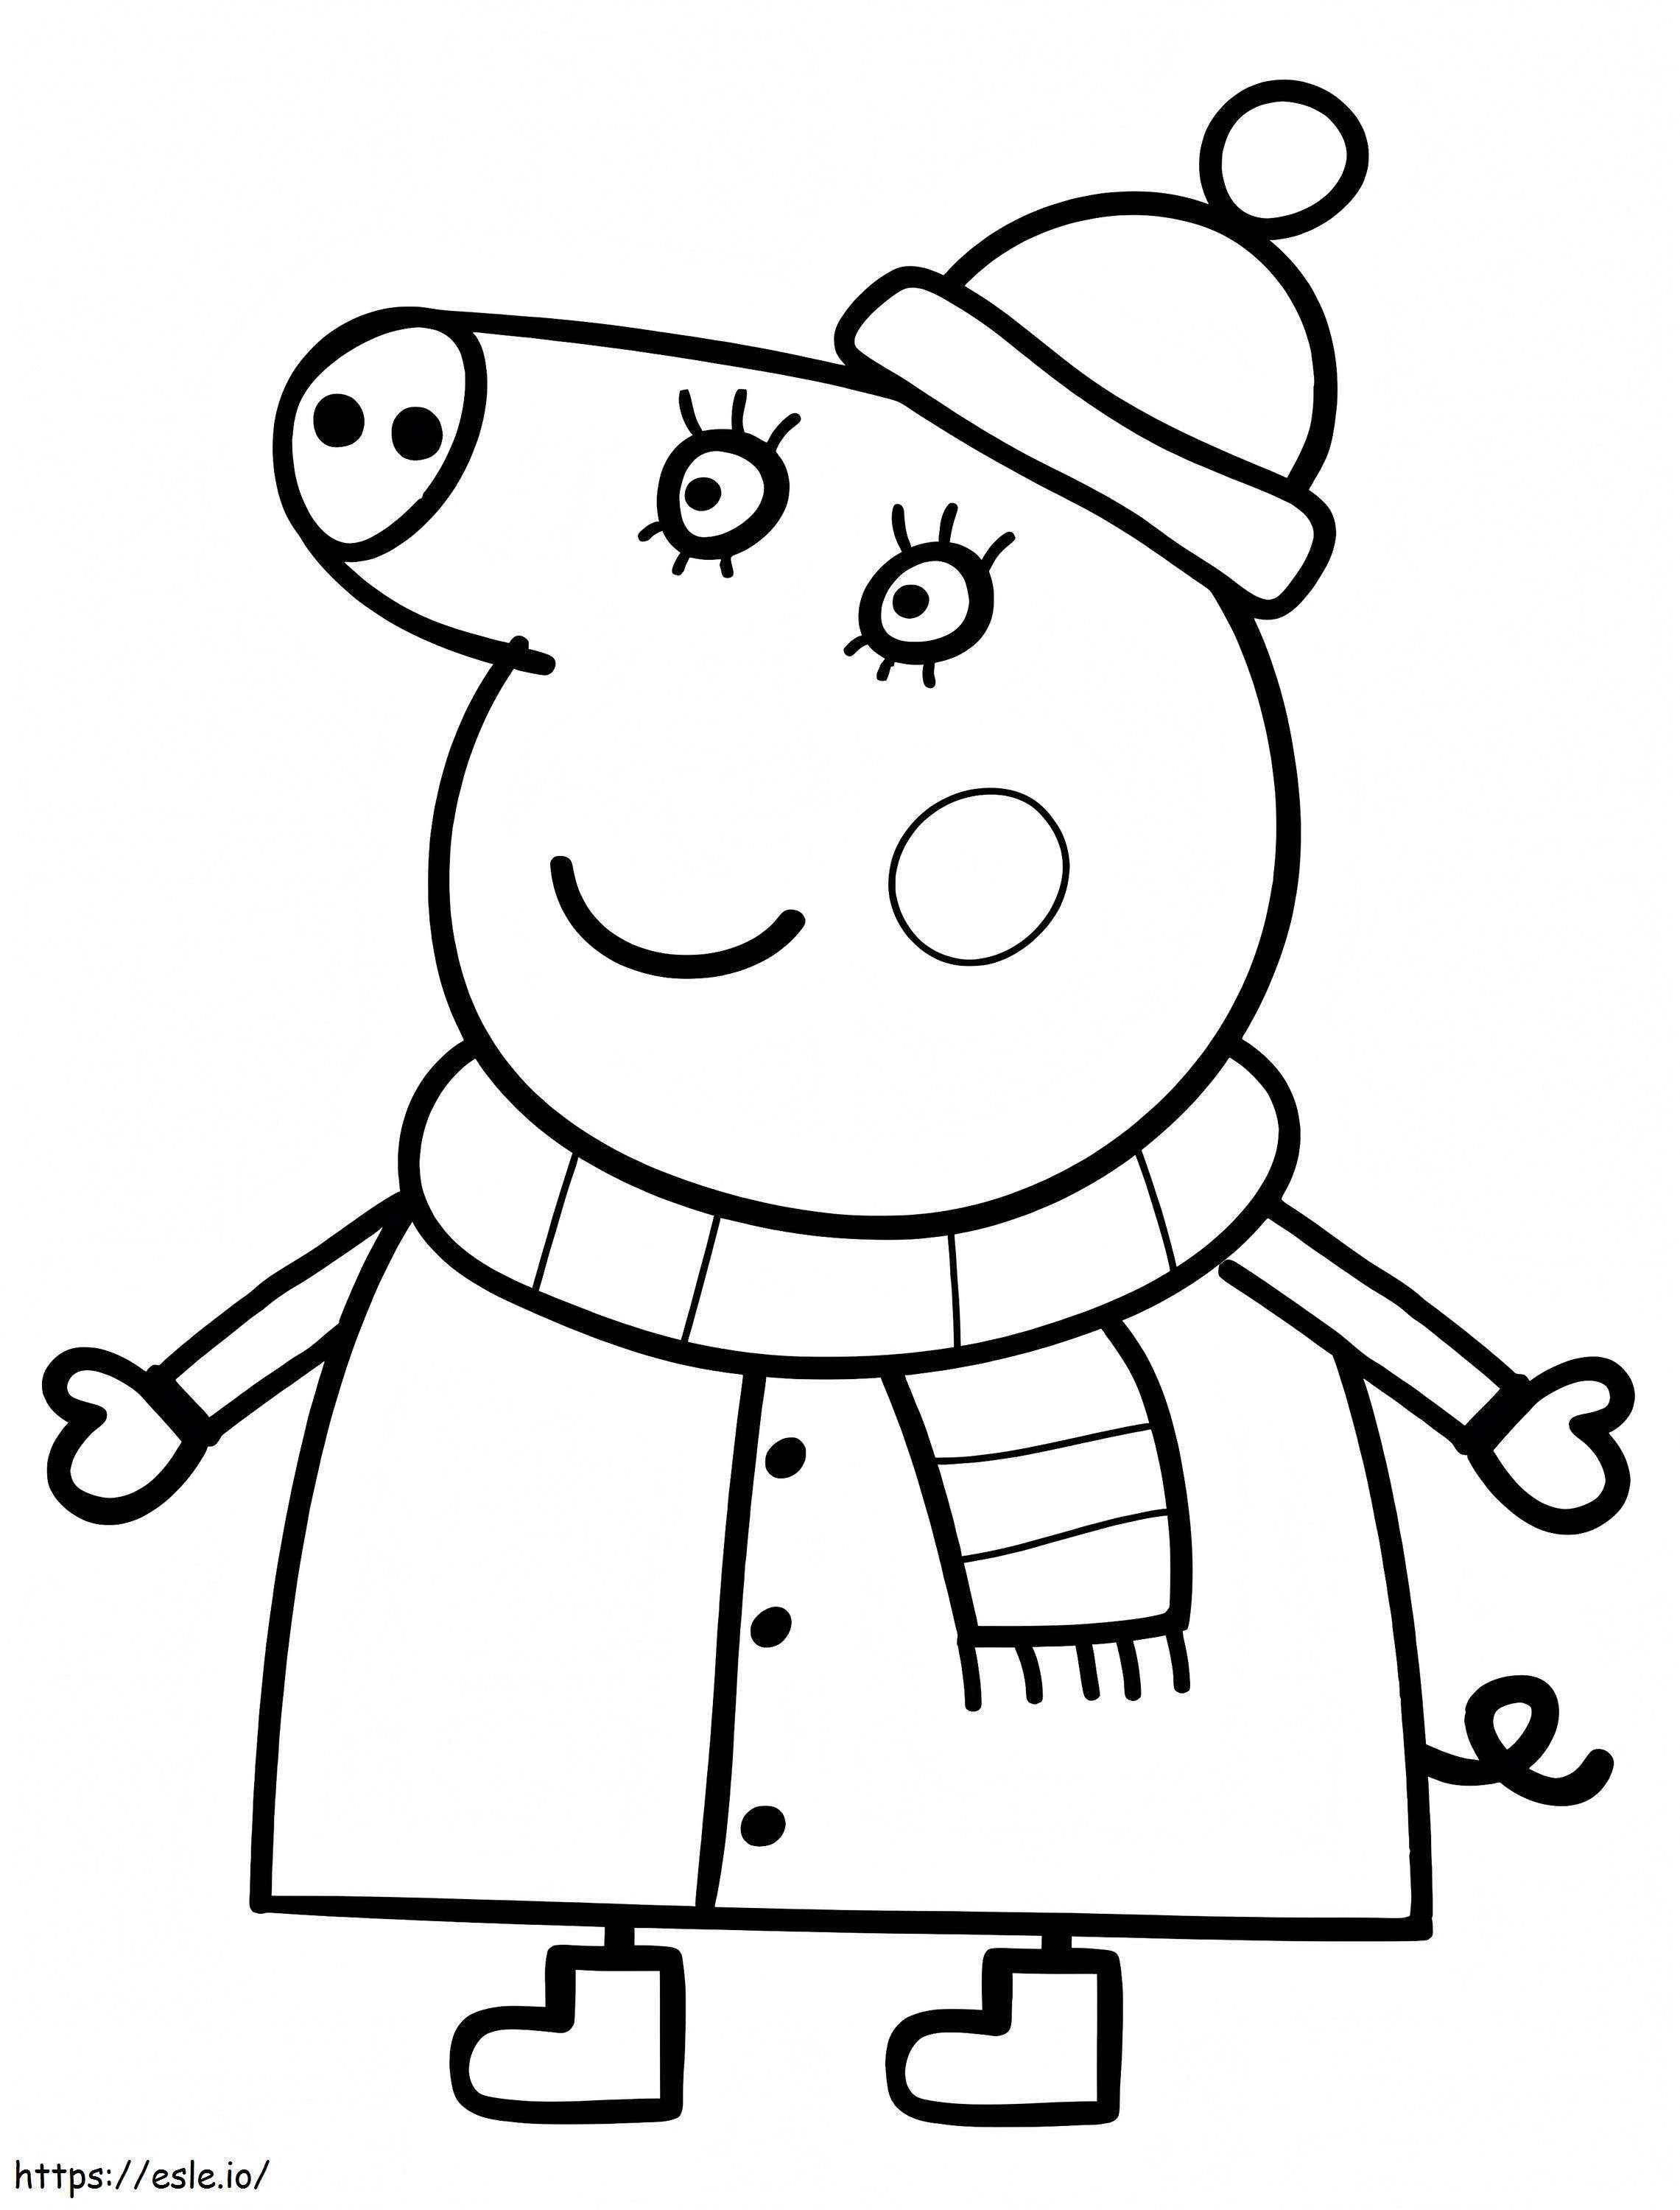 Mom Pig 1 coloring page